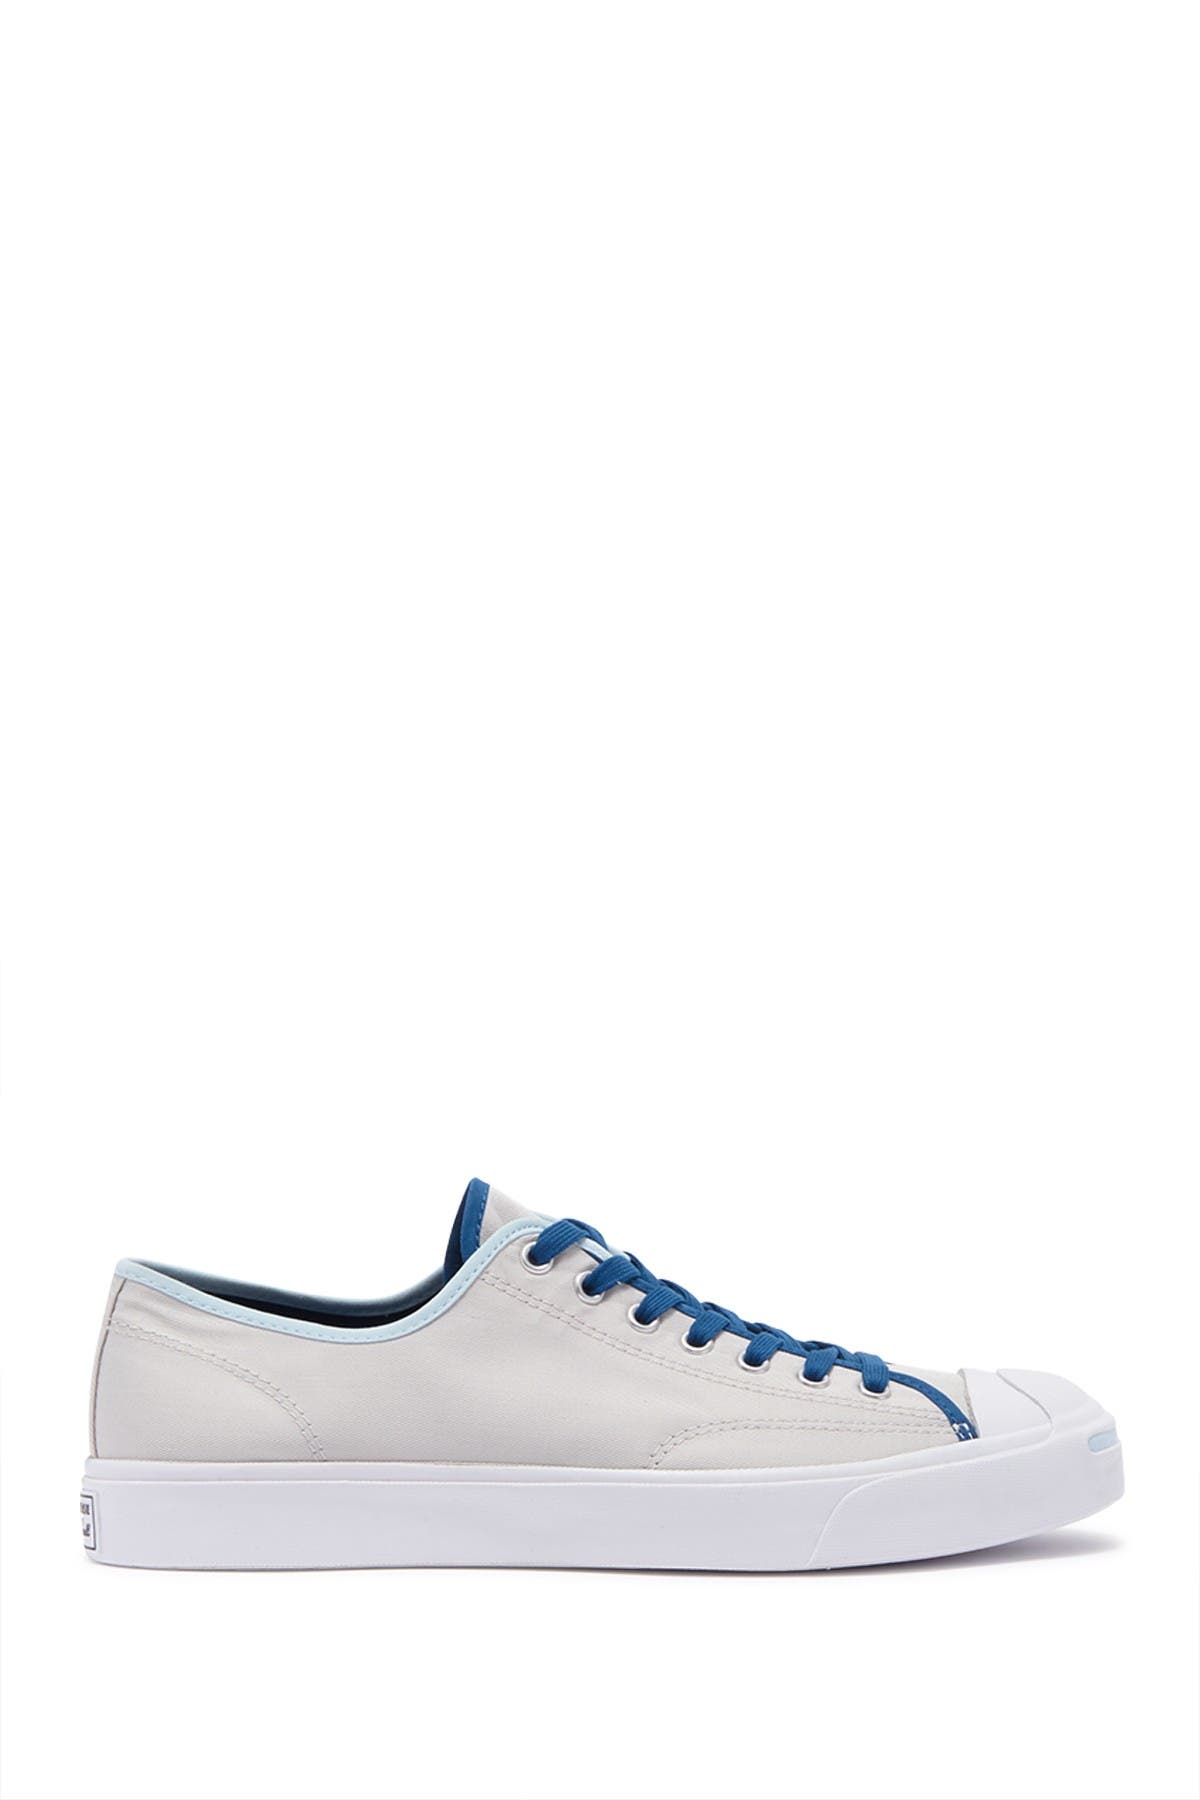 Converse | Jack Purcell Oxford Sneaker 